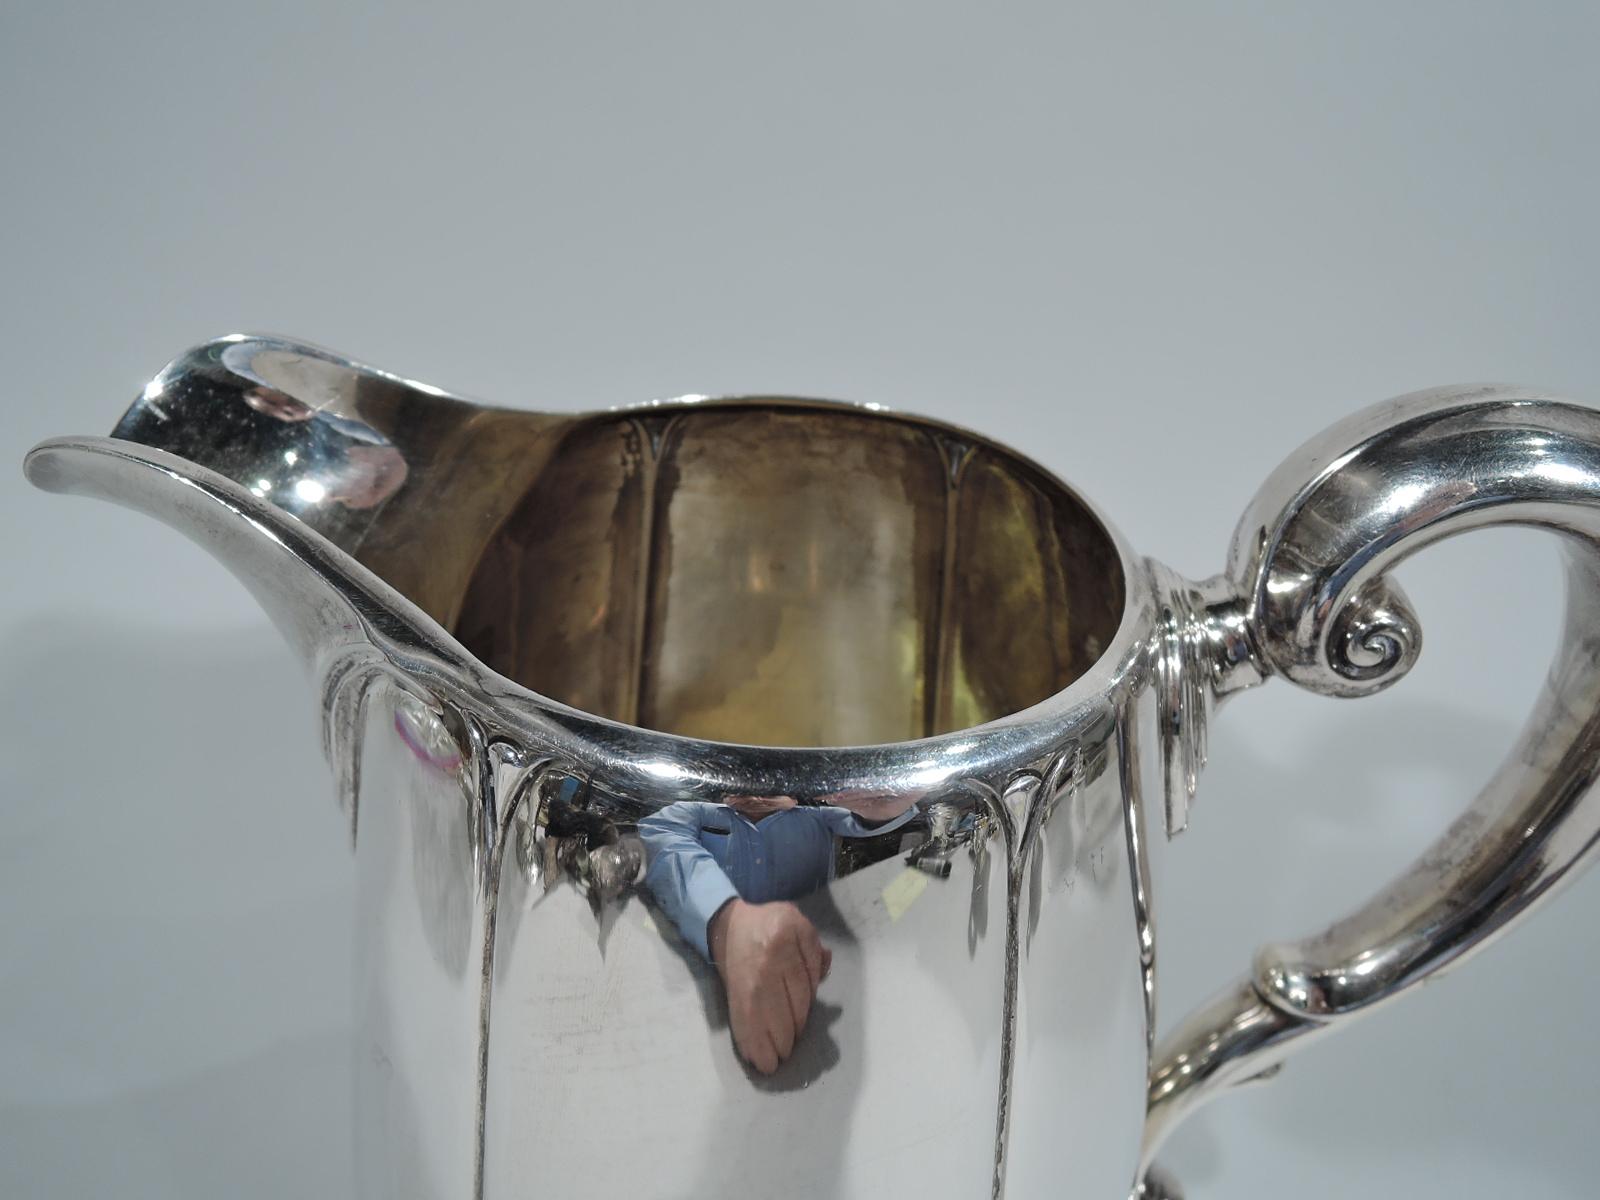 Modern classical sterling silver water pitcher. Made by Dominick & Haff in New York in 1928. Lobed and upward tapering sides, capped foliate scroll handle, wide lip spout with fluid swags, and raised circular foot with crimped trefoils. Sleek but